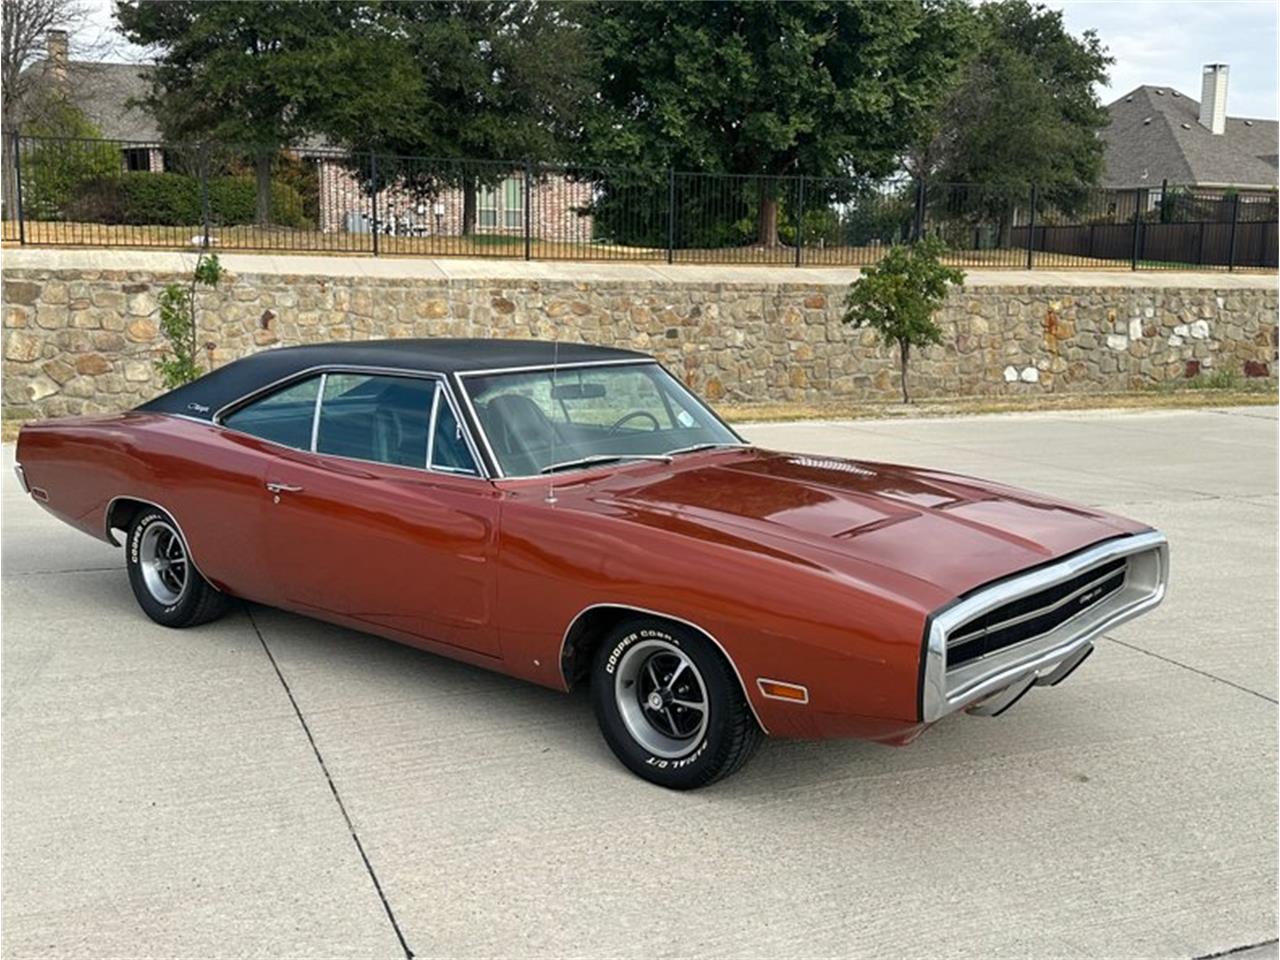 This 1970 Dodge Charger 500 Survivor Is One Nice-Looking Mopar. Is